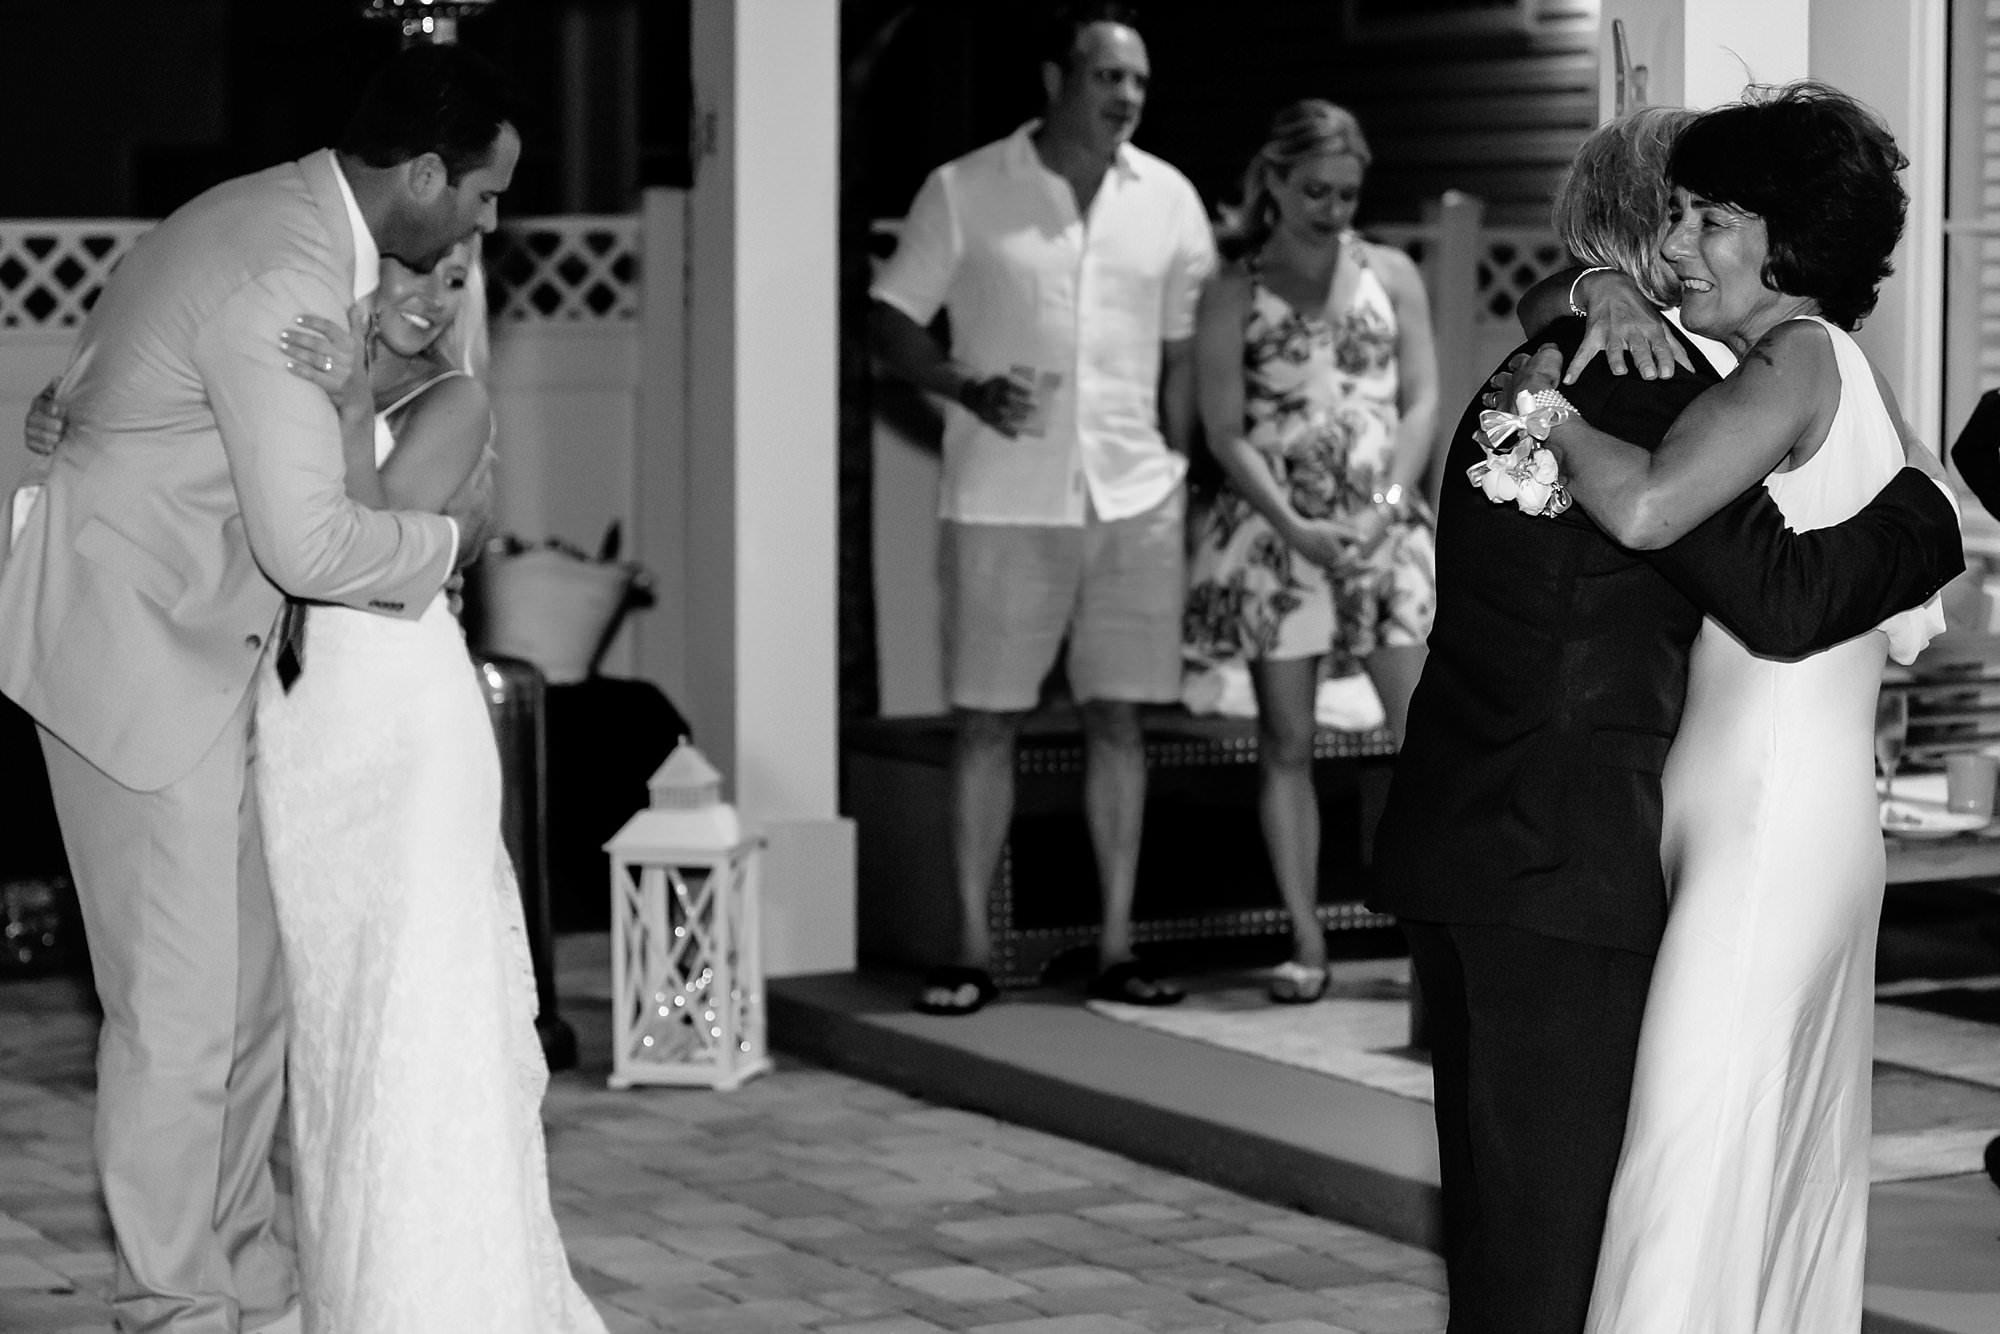 Black and white portrait of first dance portrait of bride, groom and brides parents